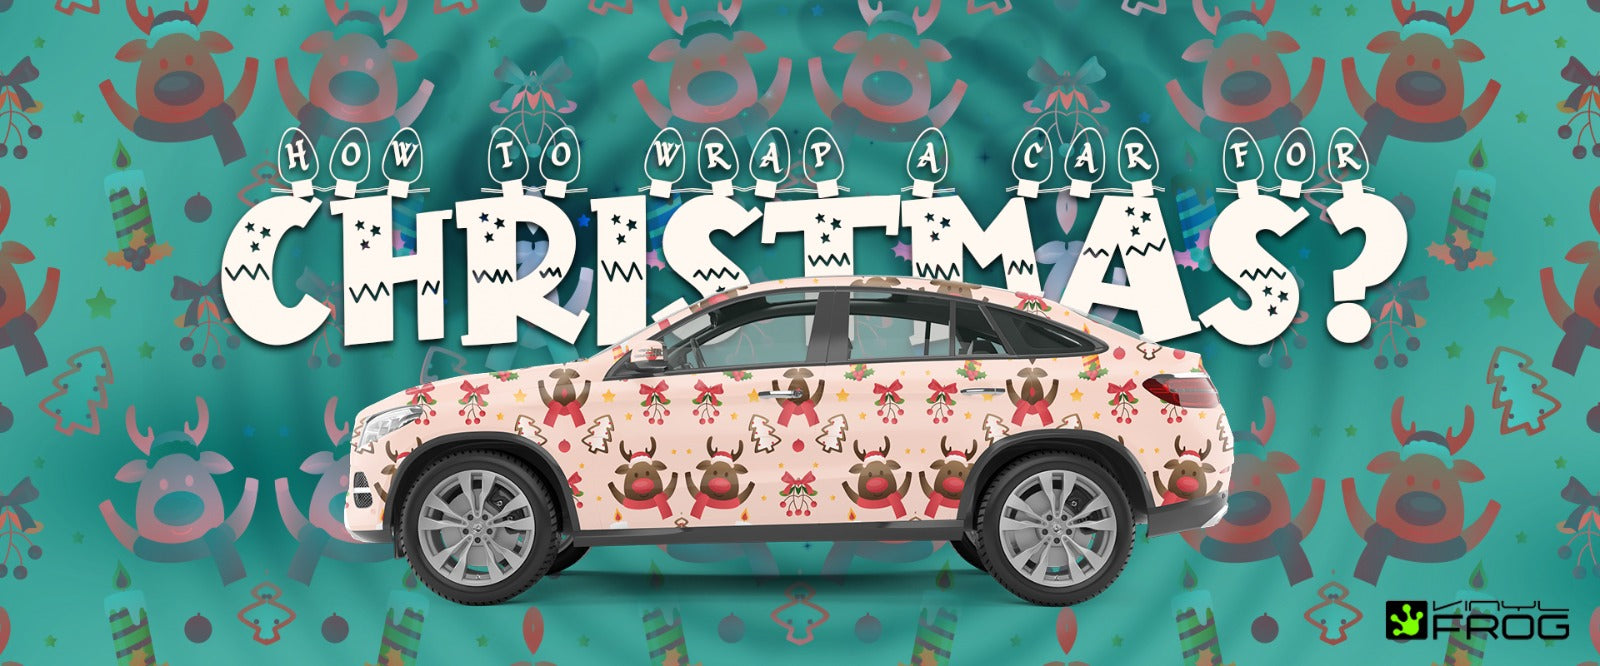 How To Wrap A Car For Christmas?